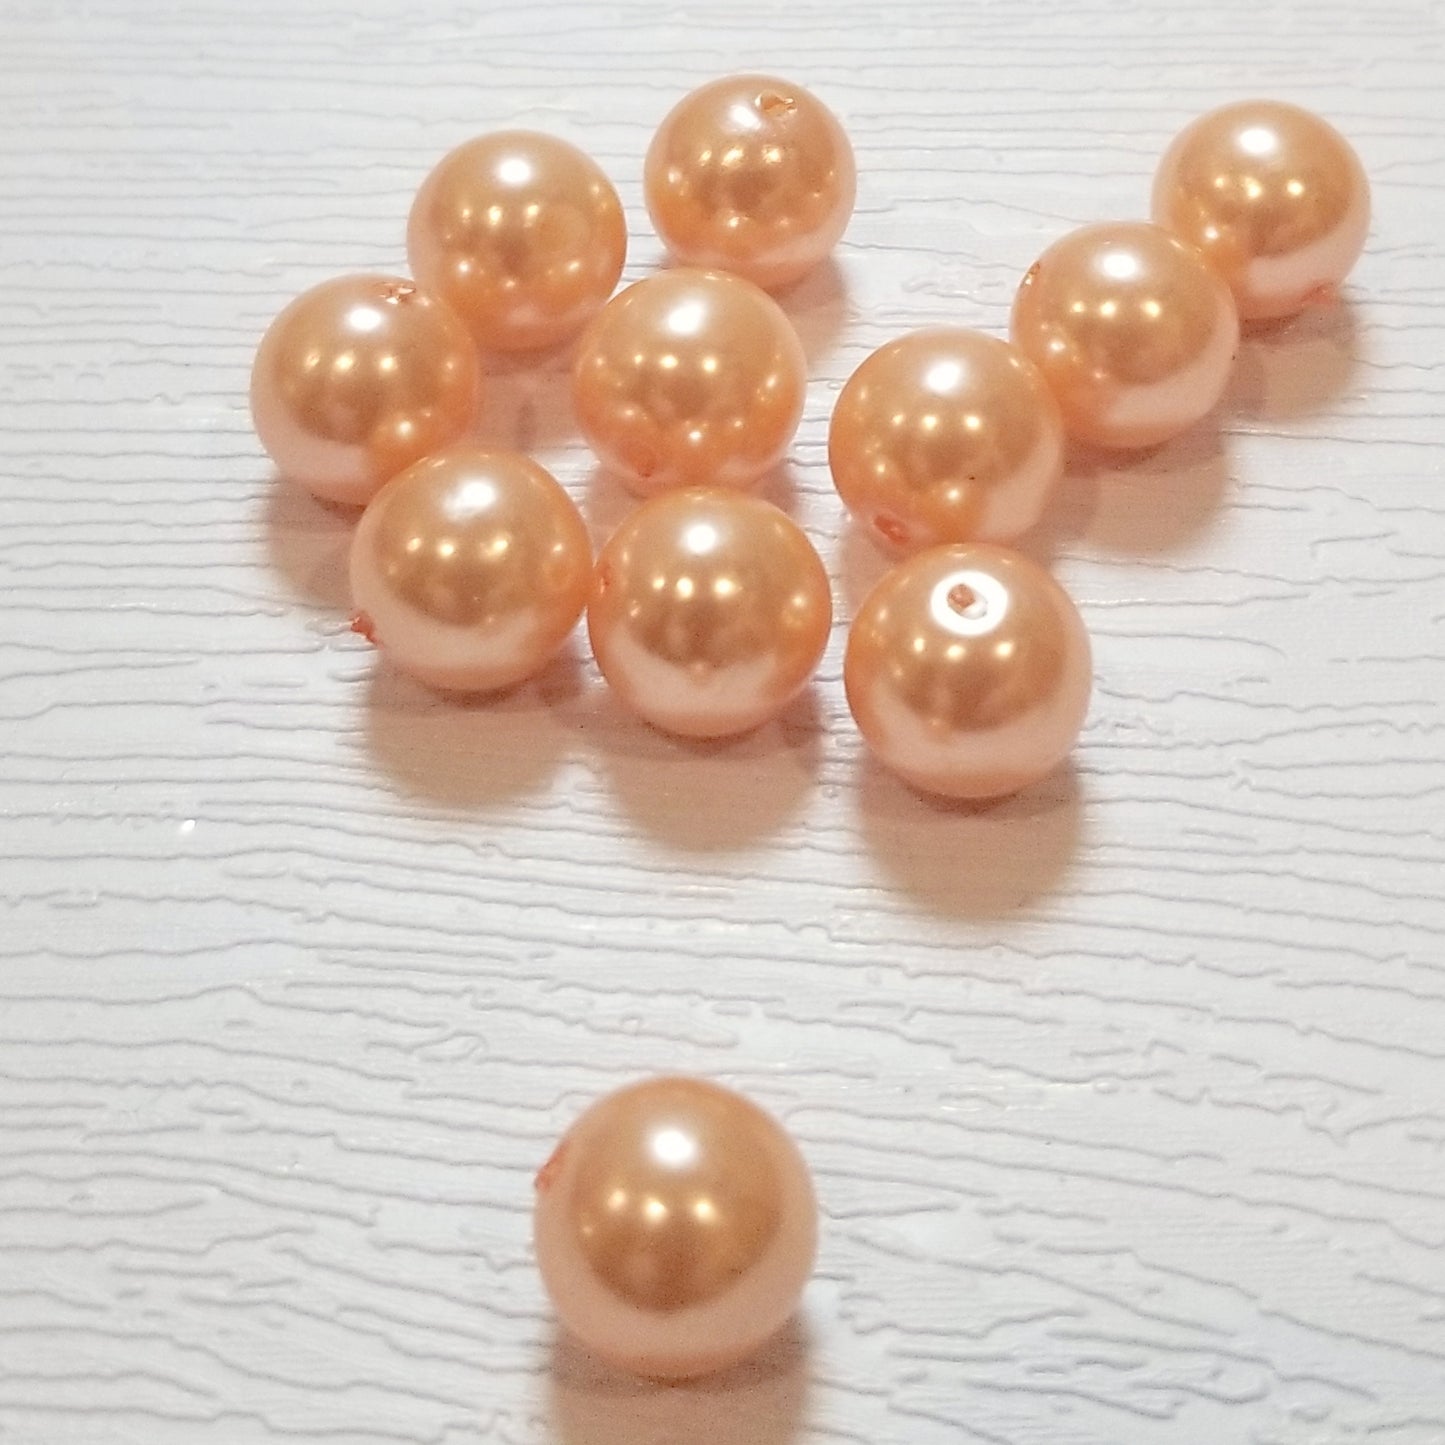 10mm Apricot Vintage Pearl Plastic Round Beads,